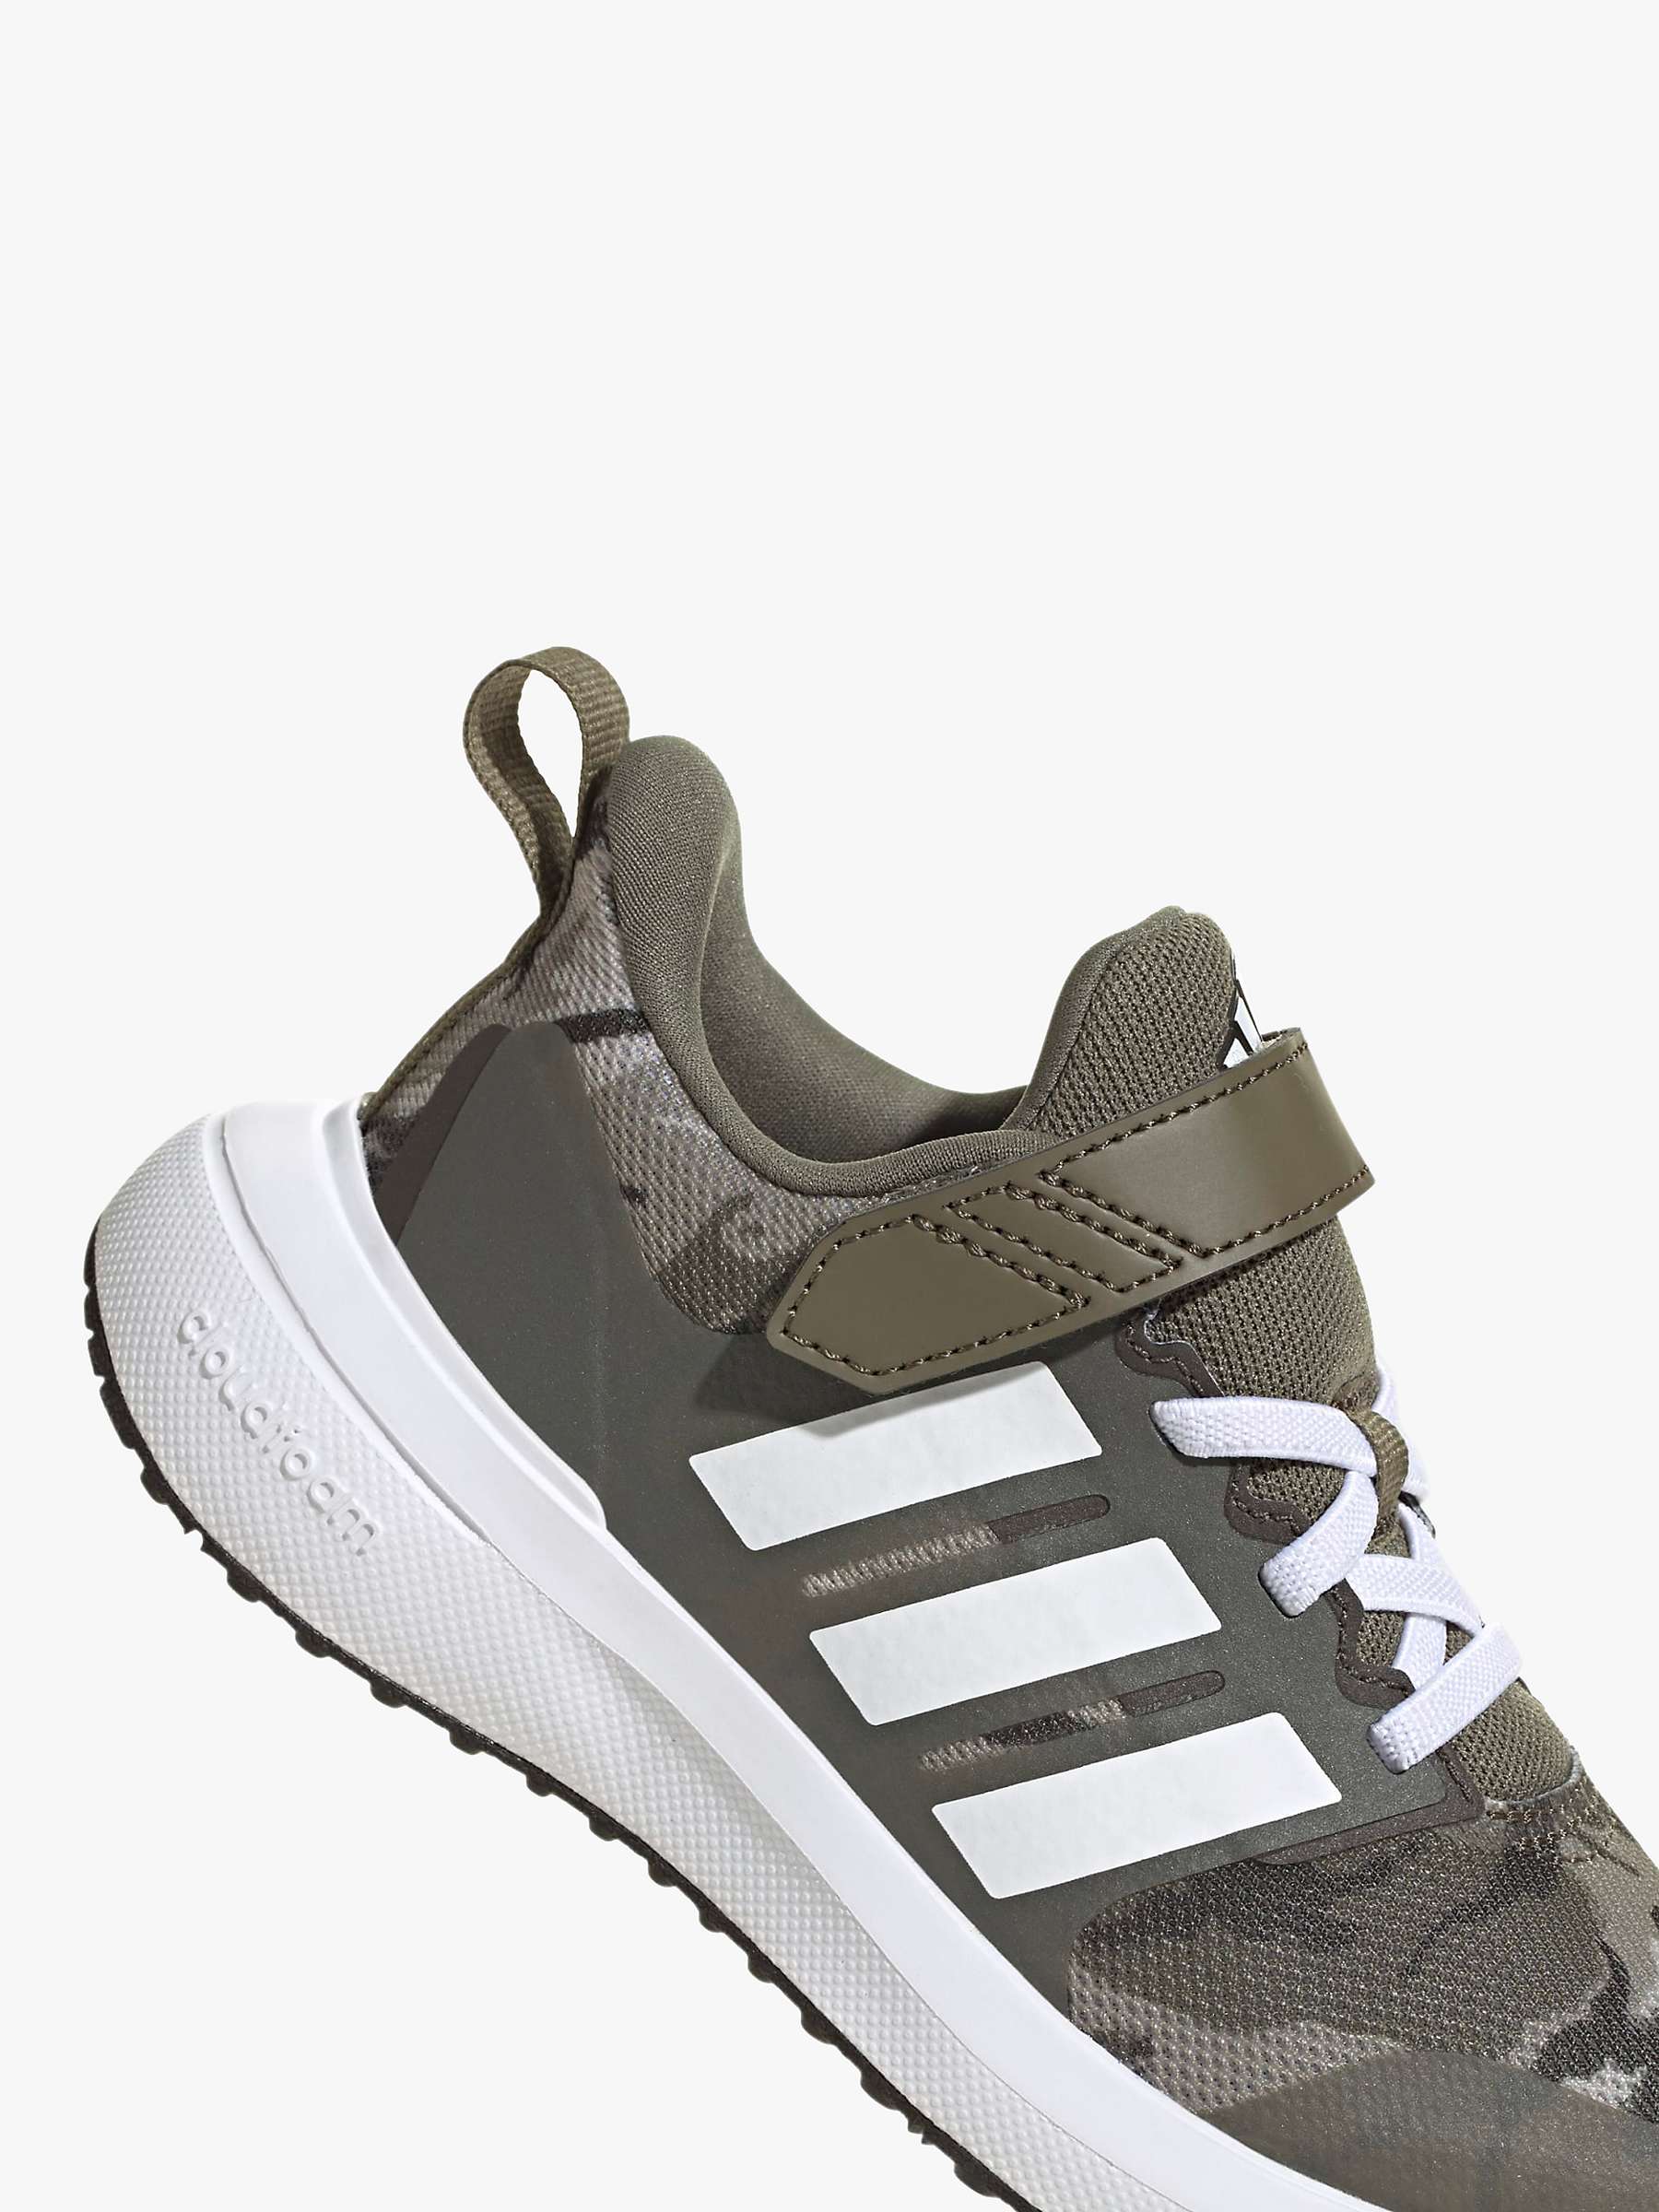 Buy adidas Kids' Forta Run 2.0 Trainers, Olive Online at johnlewis.com